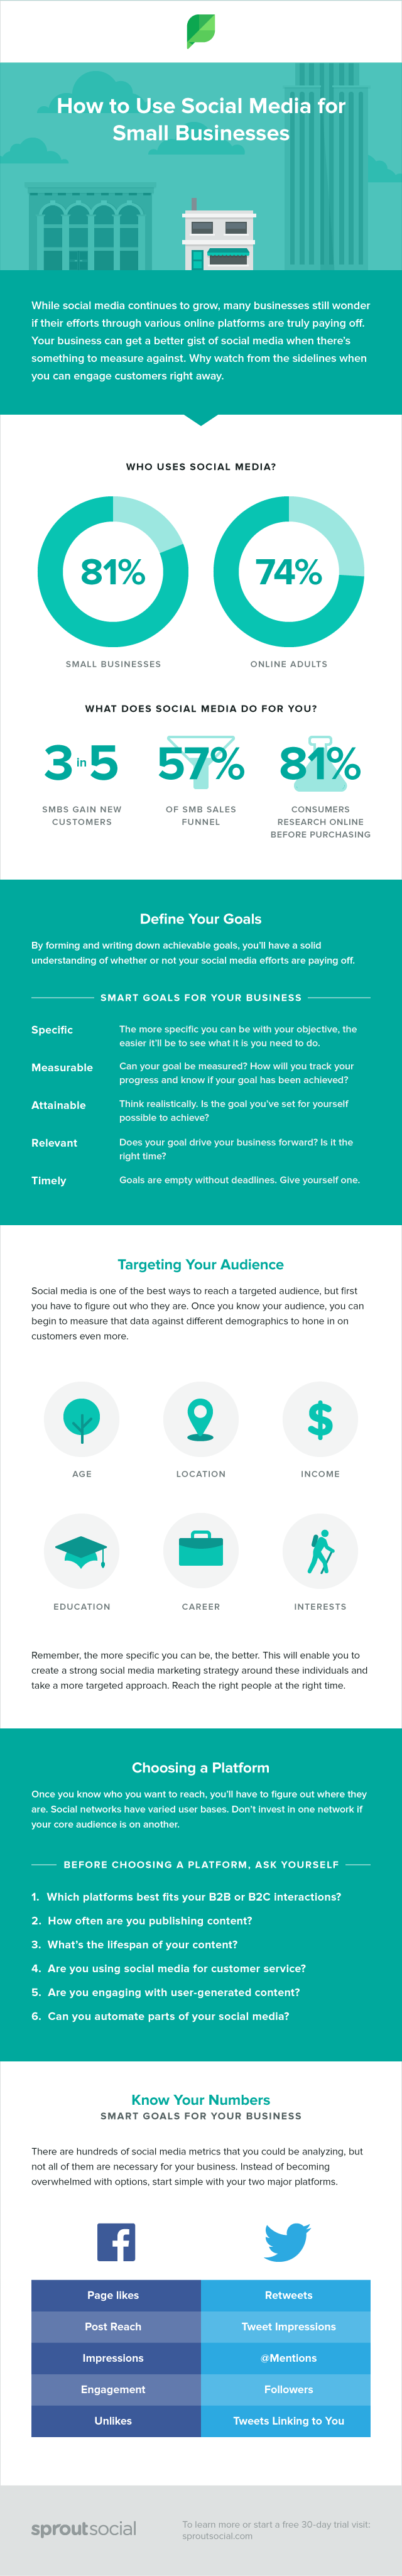 Social Media for Small Business Infographic